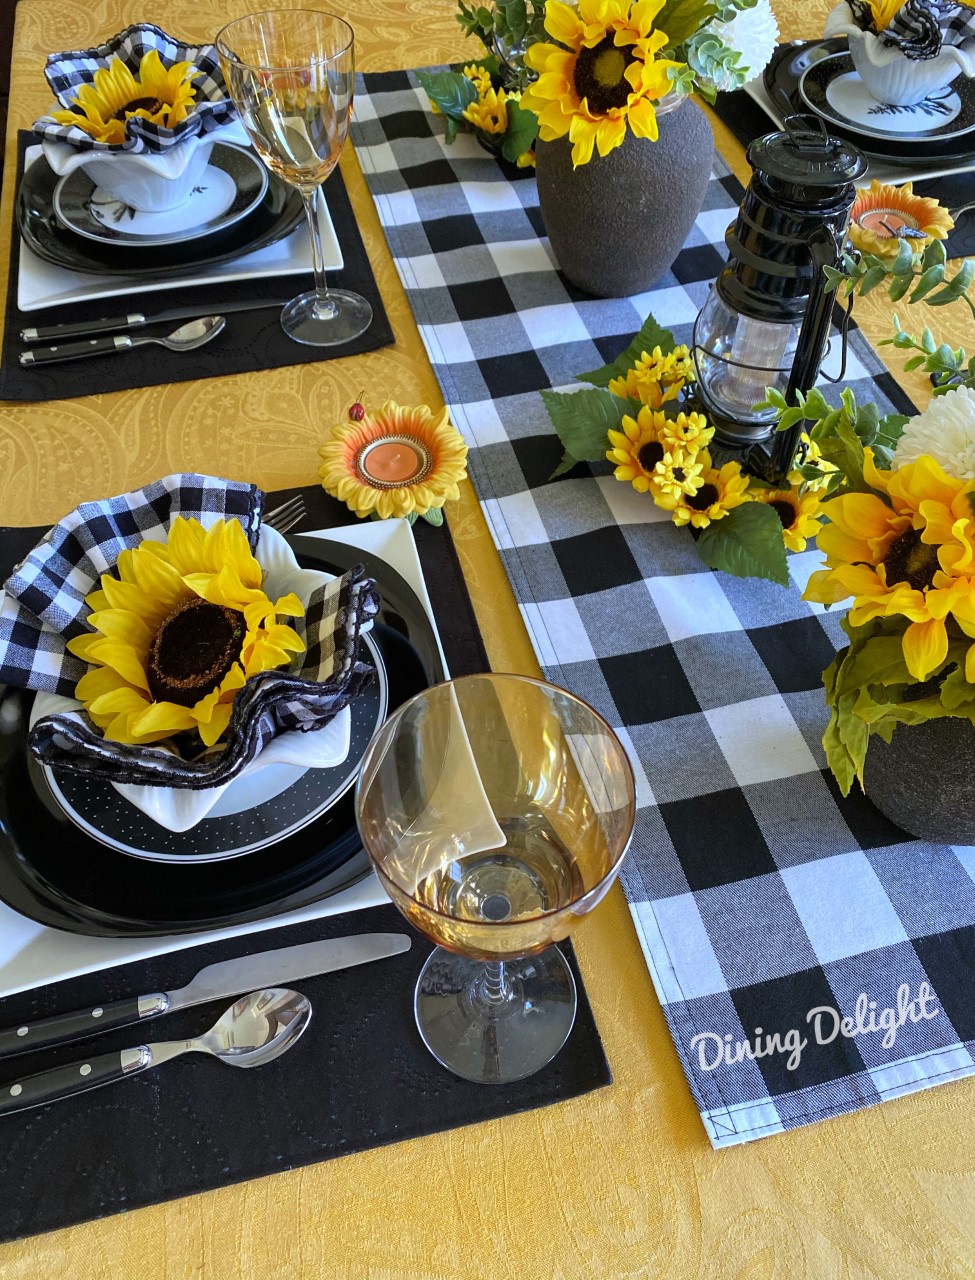 Dining Delight: Sunflowers and Buffalo Check Tablescape